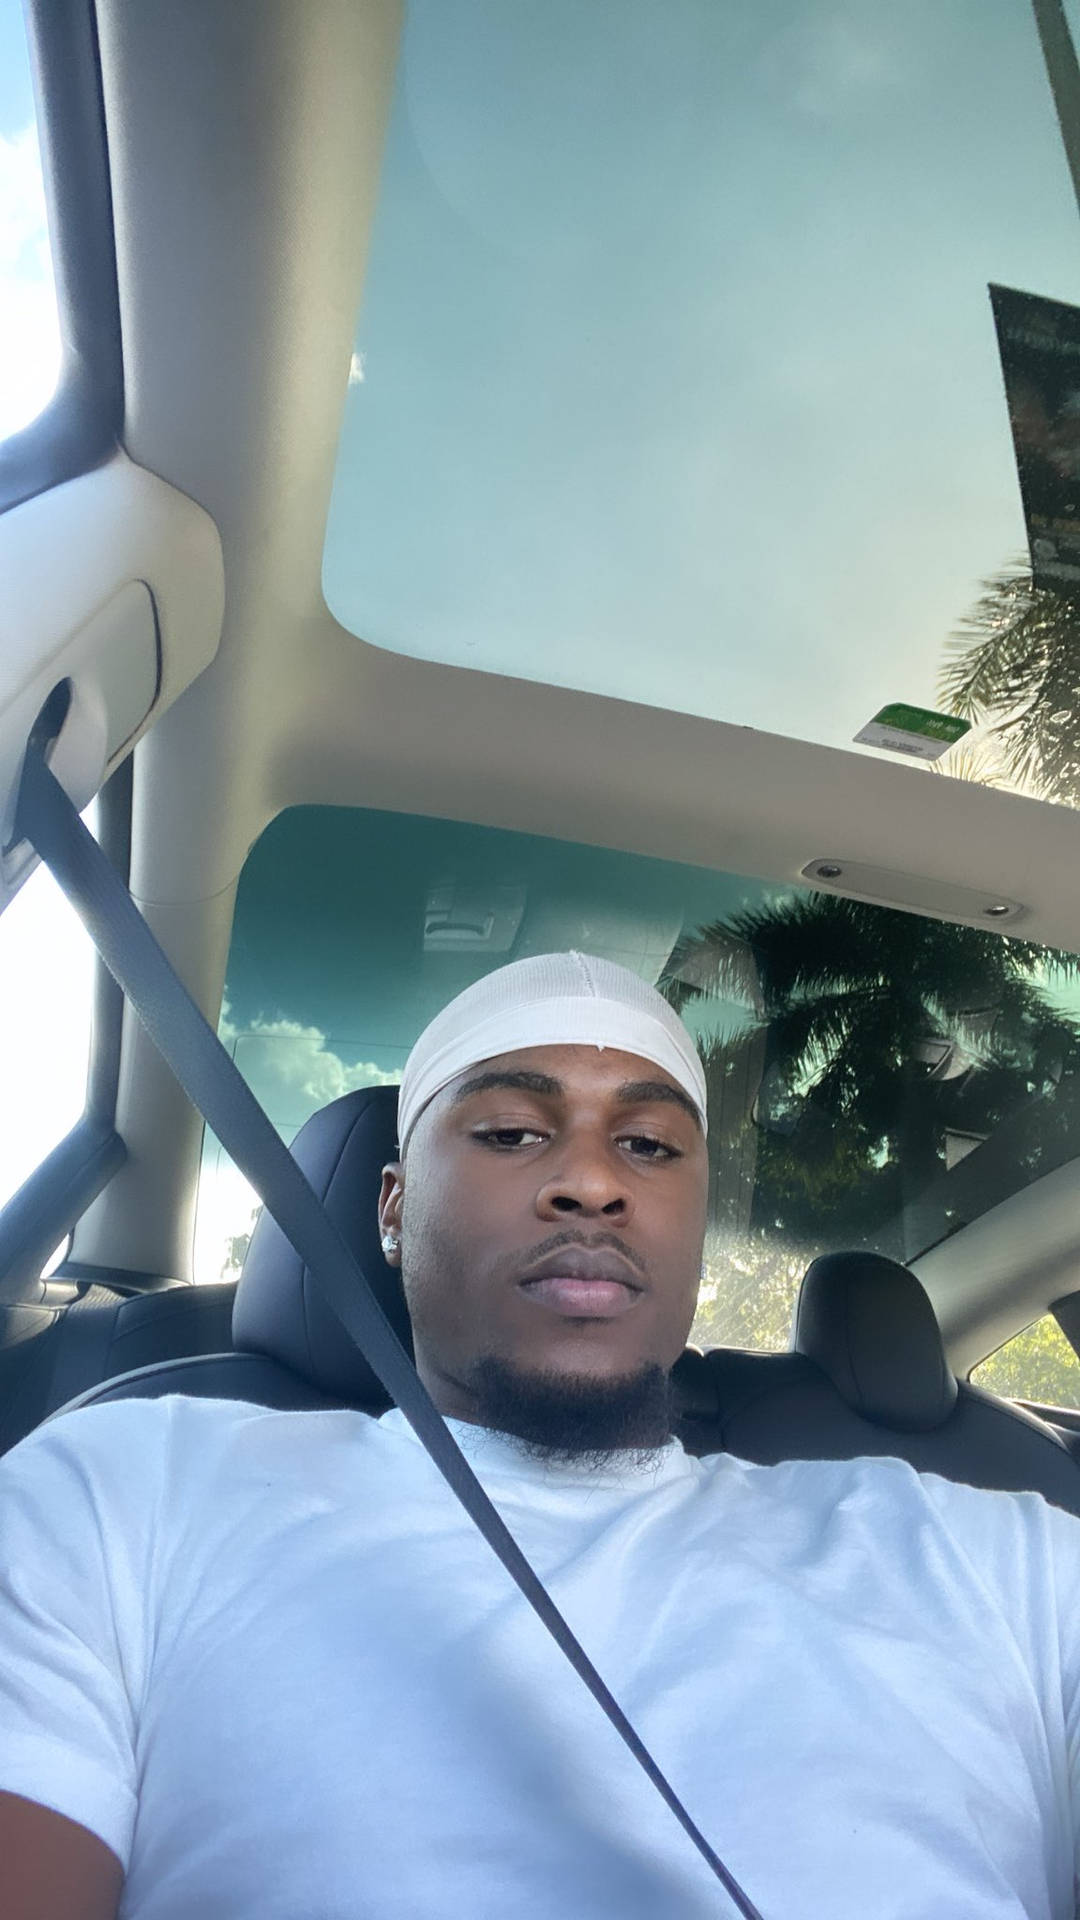 Caption: Instagram Star Swavy Lee Living The White-themed Luxury In A Car Selfie Background